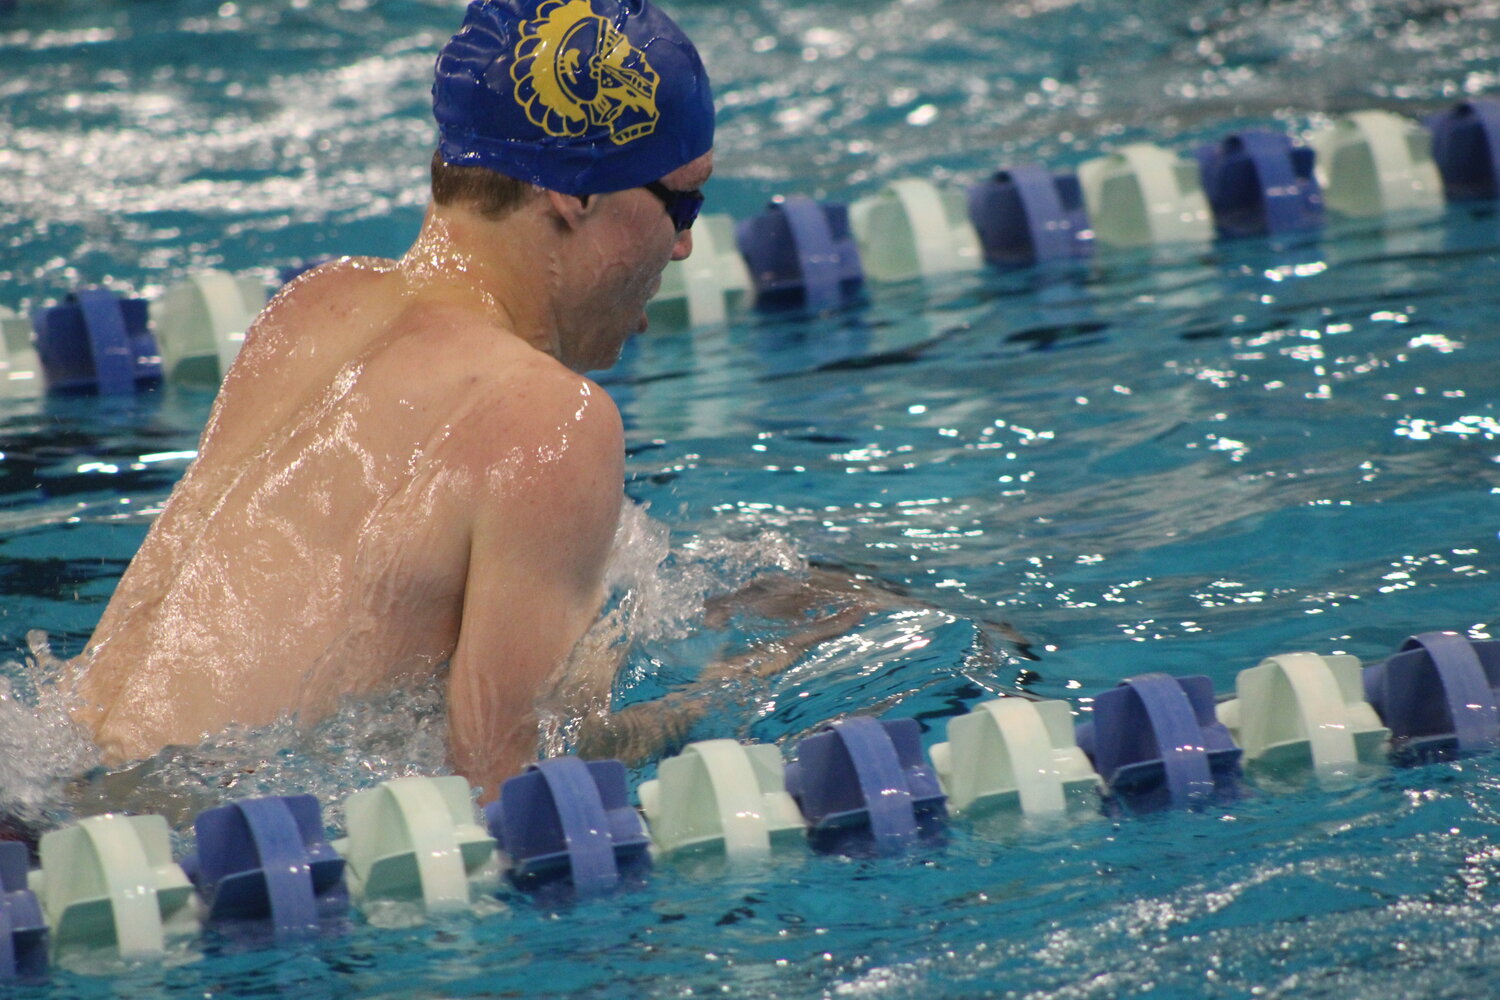 Senior Whitman Horton broke a pair of county records in the 100 backstroke and 200 IM as he looks for a trip back to the IHSAA State Finals.